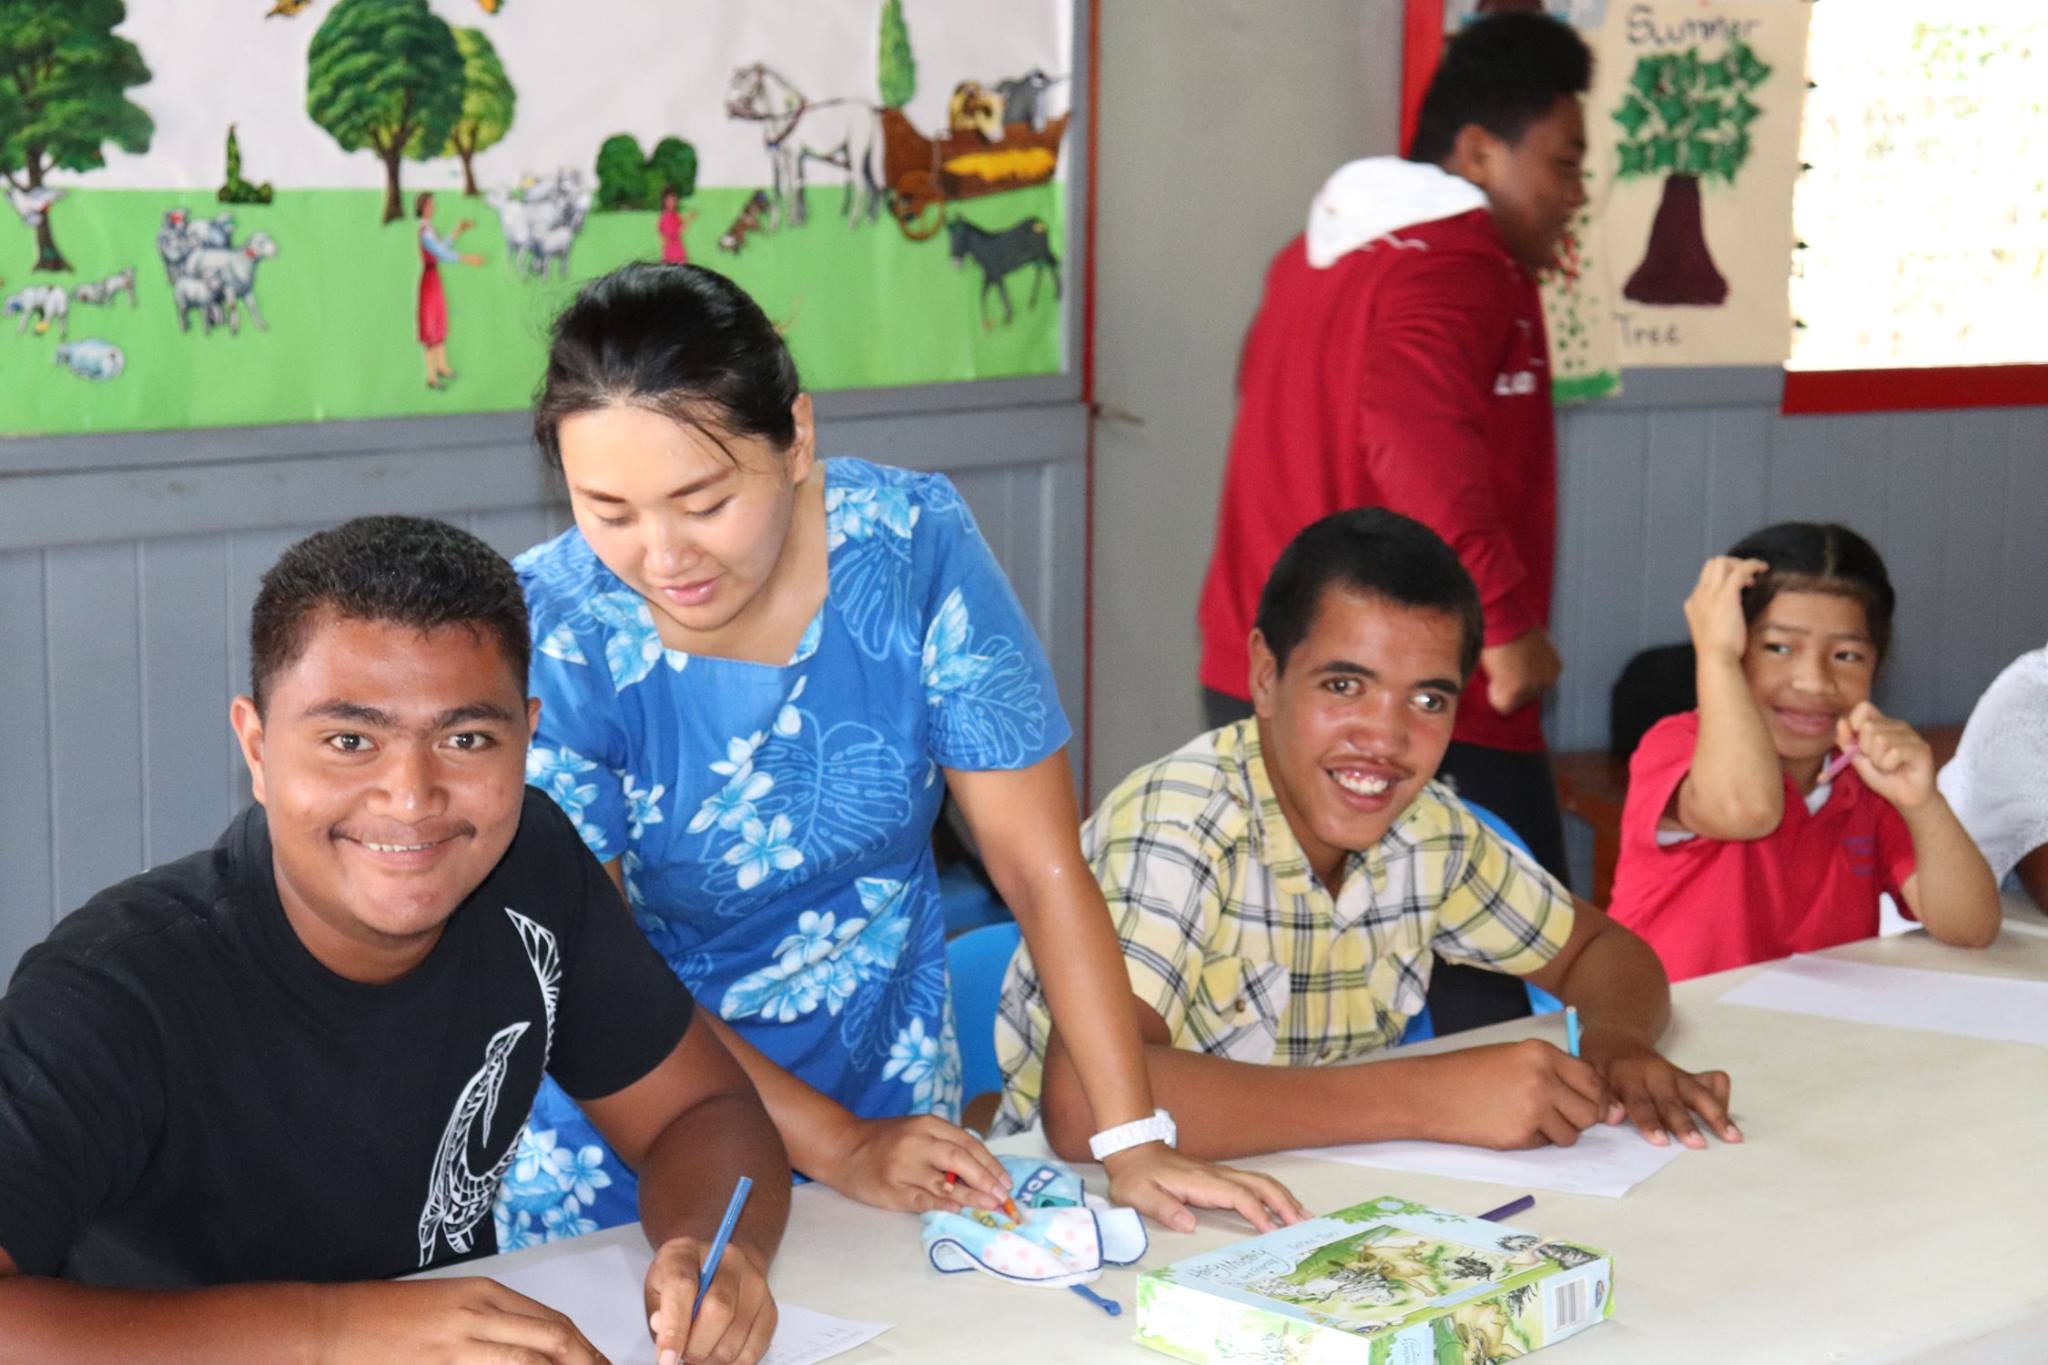 A classroom with students with disabilities and a teacher engaged in learning activities. The teacher, wearing a blue floral dress, is assisting two male students sitting at a table and working on something together. The classroom environment appears inclusive and supportive for students with various abilities or needs.